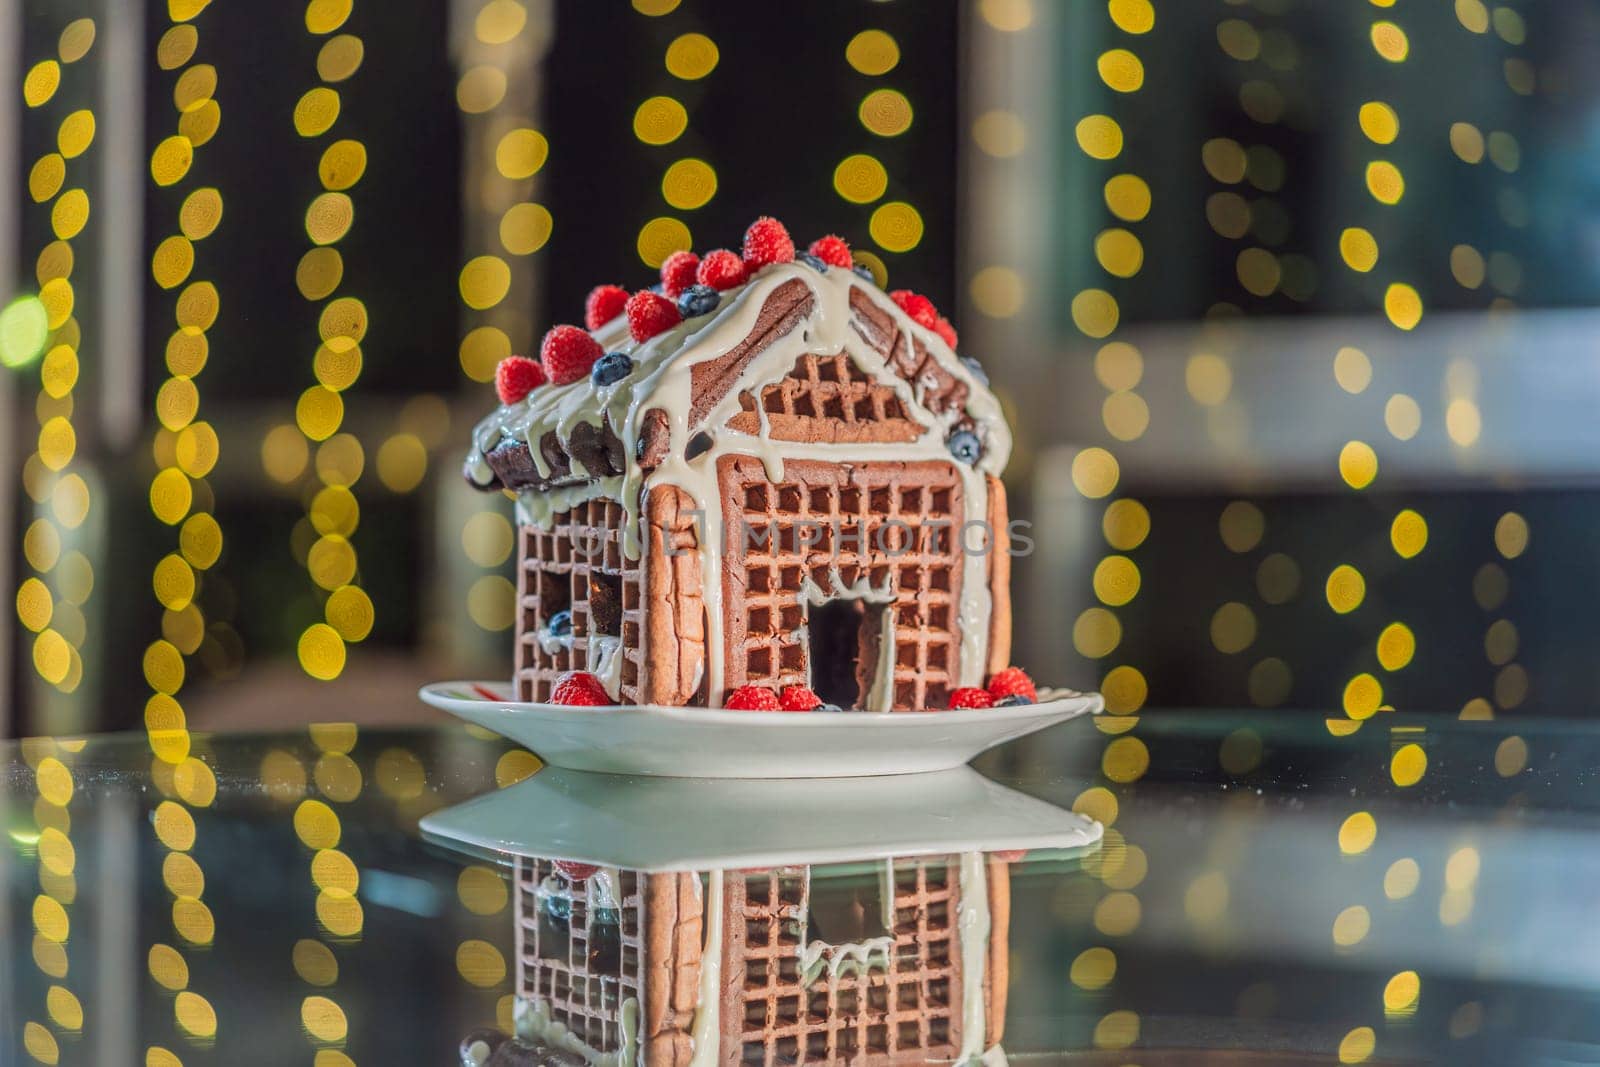 magic of an unusual gingerbread house amid festive Christmas lights. A whimsical scene capturing holiday enchantment and creative culinary delight.